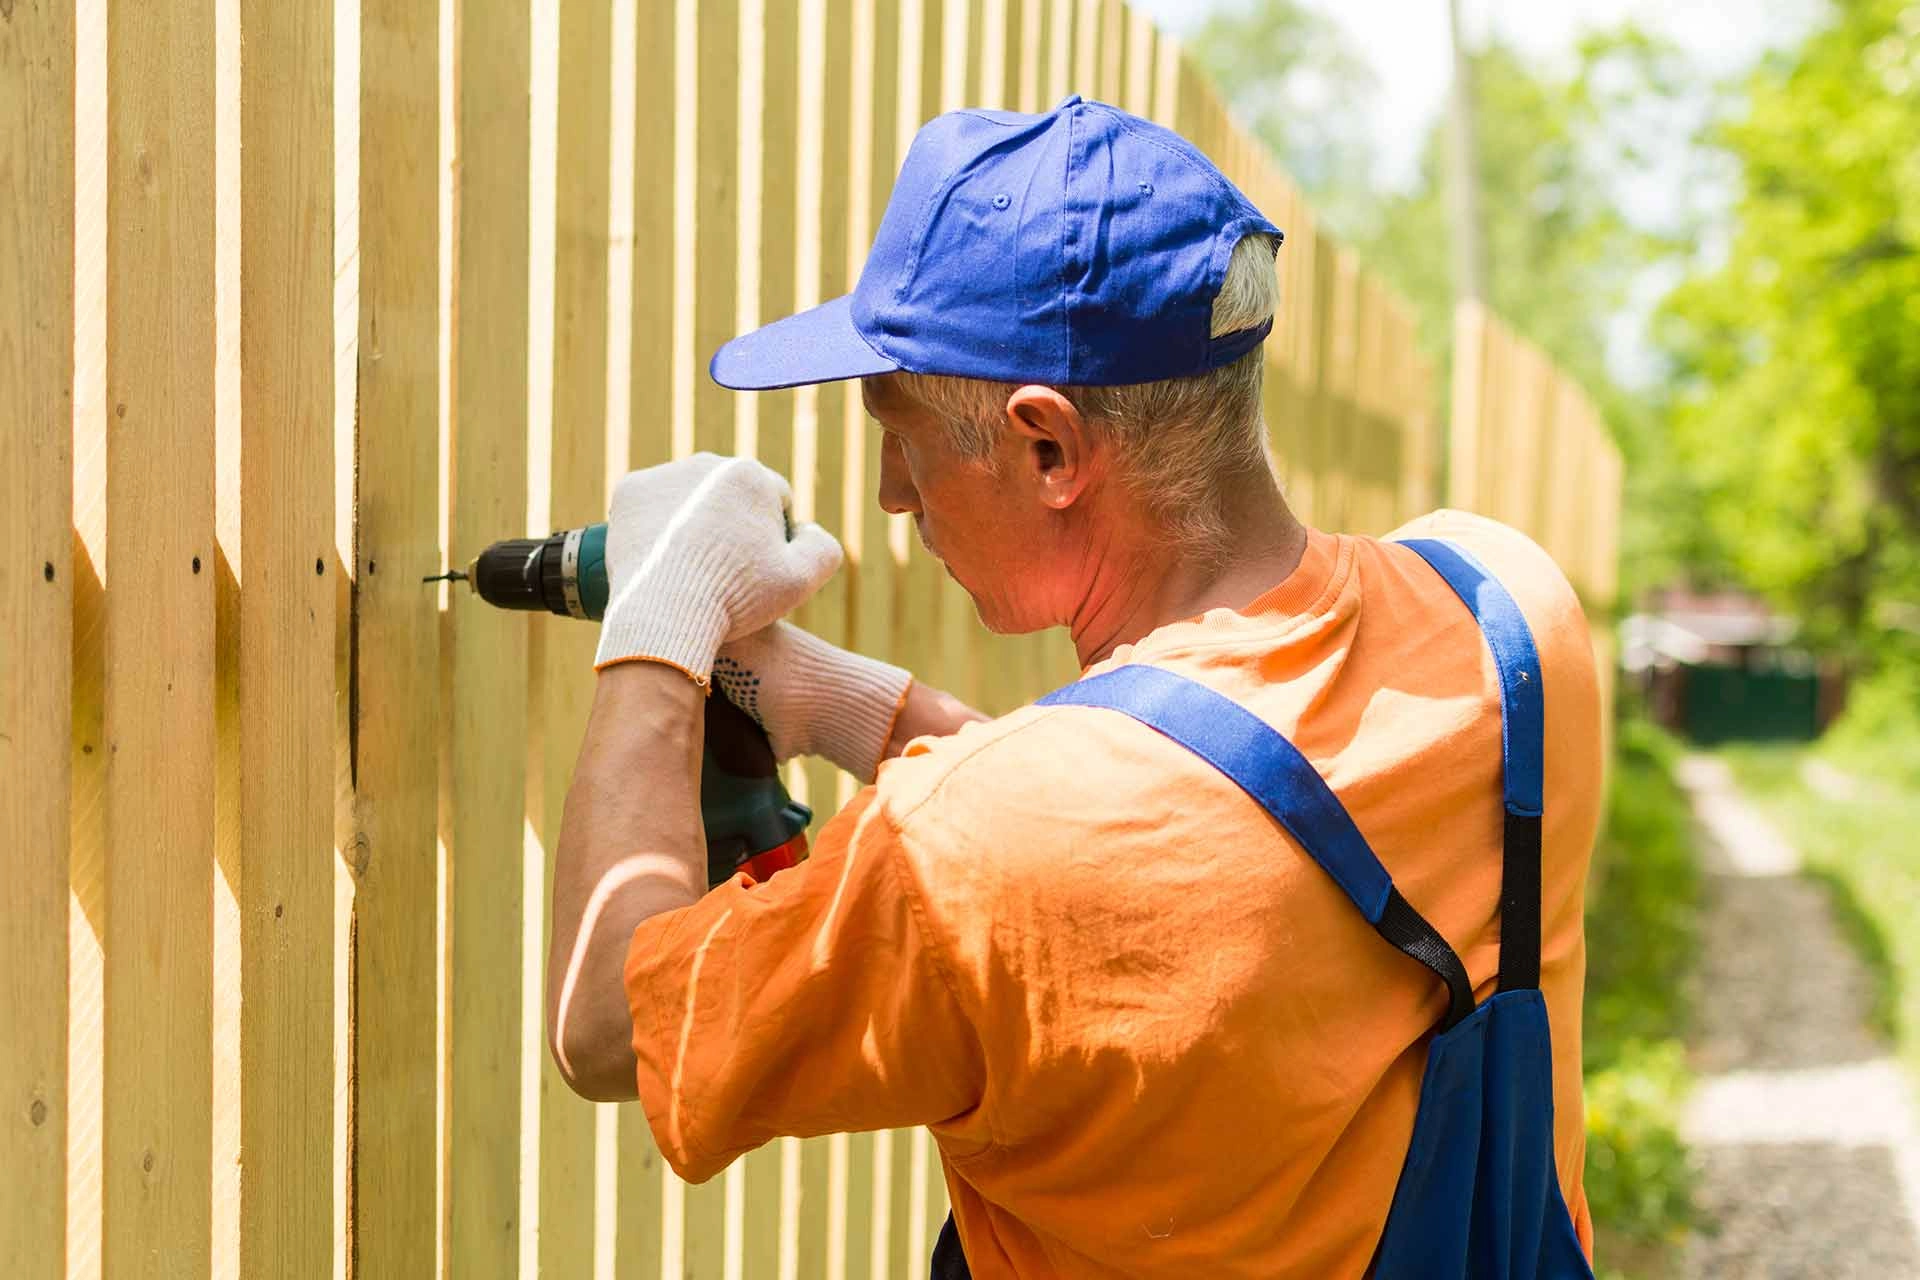 an image of a person using a drill to drill nails into a wooden fence